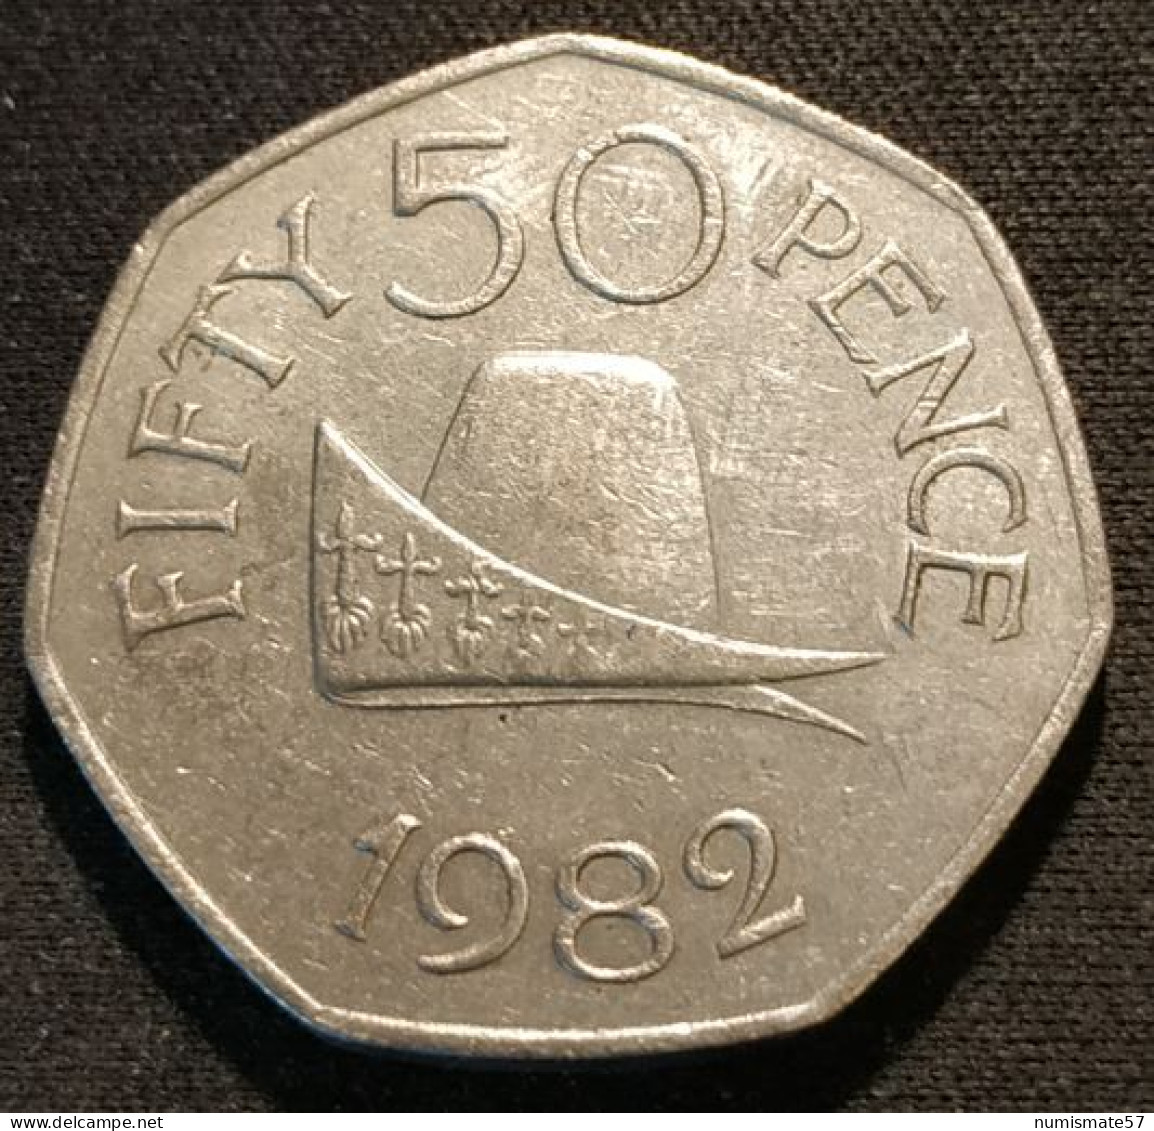 GUERNESEY - 50 PENCE 1982 - Elizabeth II - KM 34 - FIFTY PENCE - GUERNSEY - Guernesey